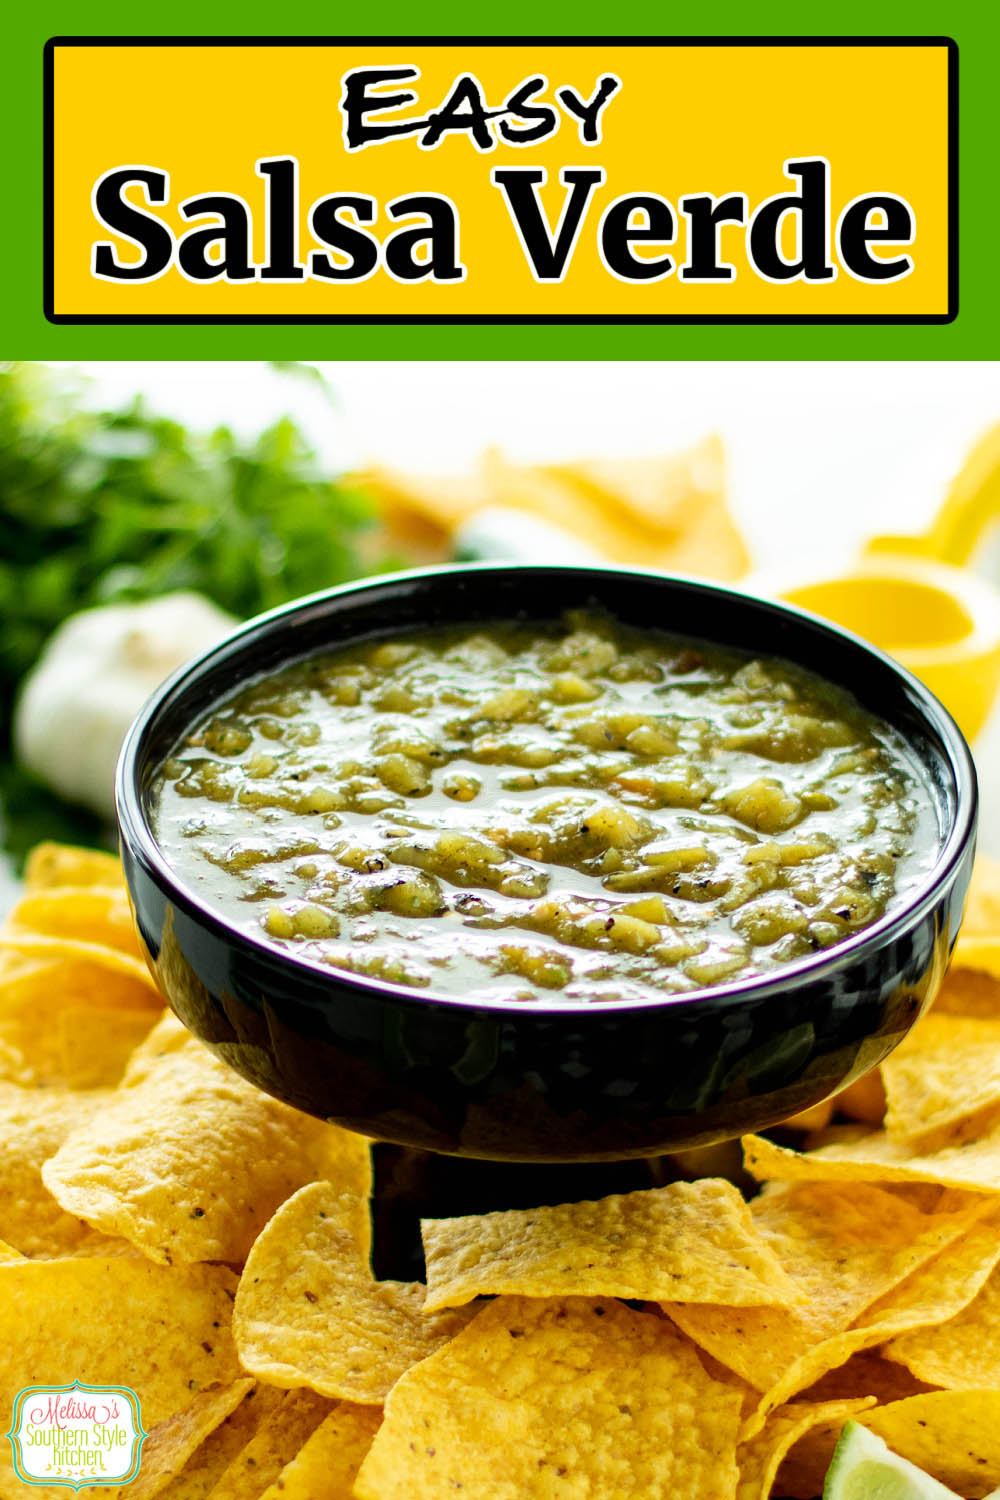 Drizzle this homemade Salsa Verde on tacos, enchiladas and burritos or with tortilla chips for dipping. #salsa #salsaverde #greensalsarecipe #superbowlrecipes #greenchilesalsa #easysalsaverde